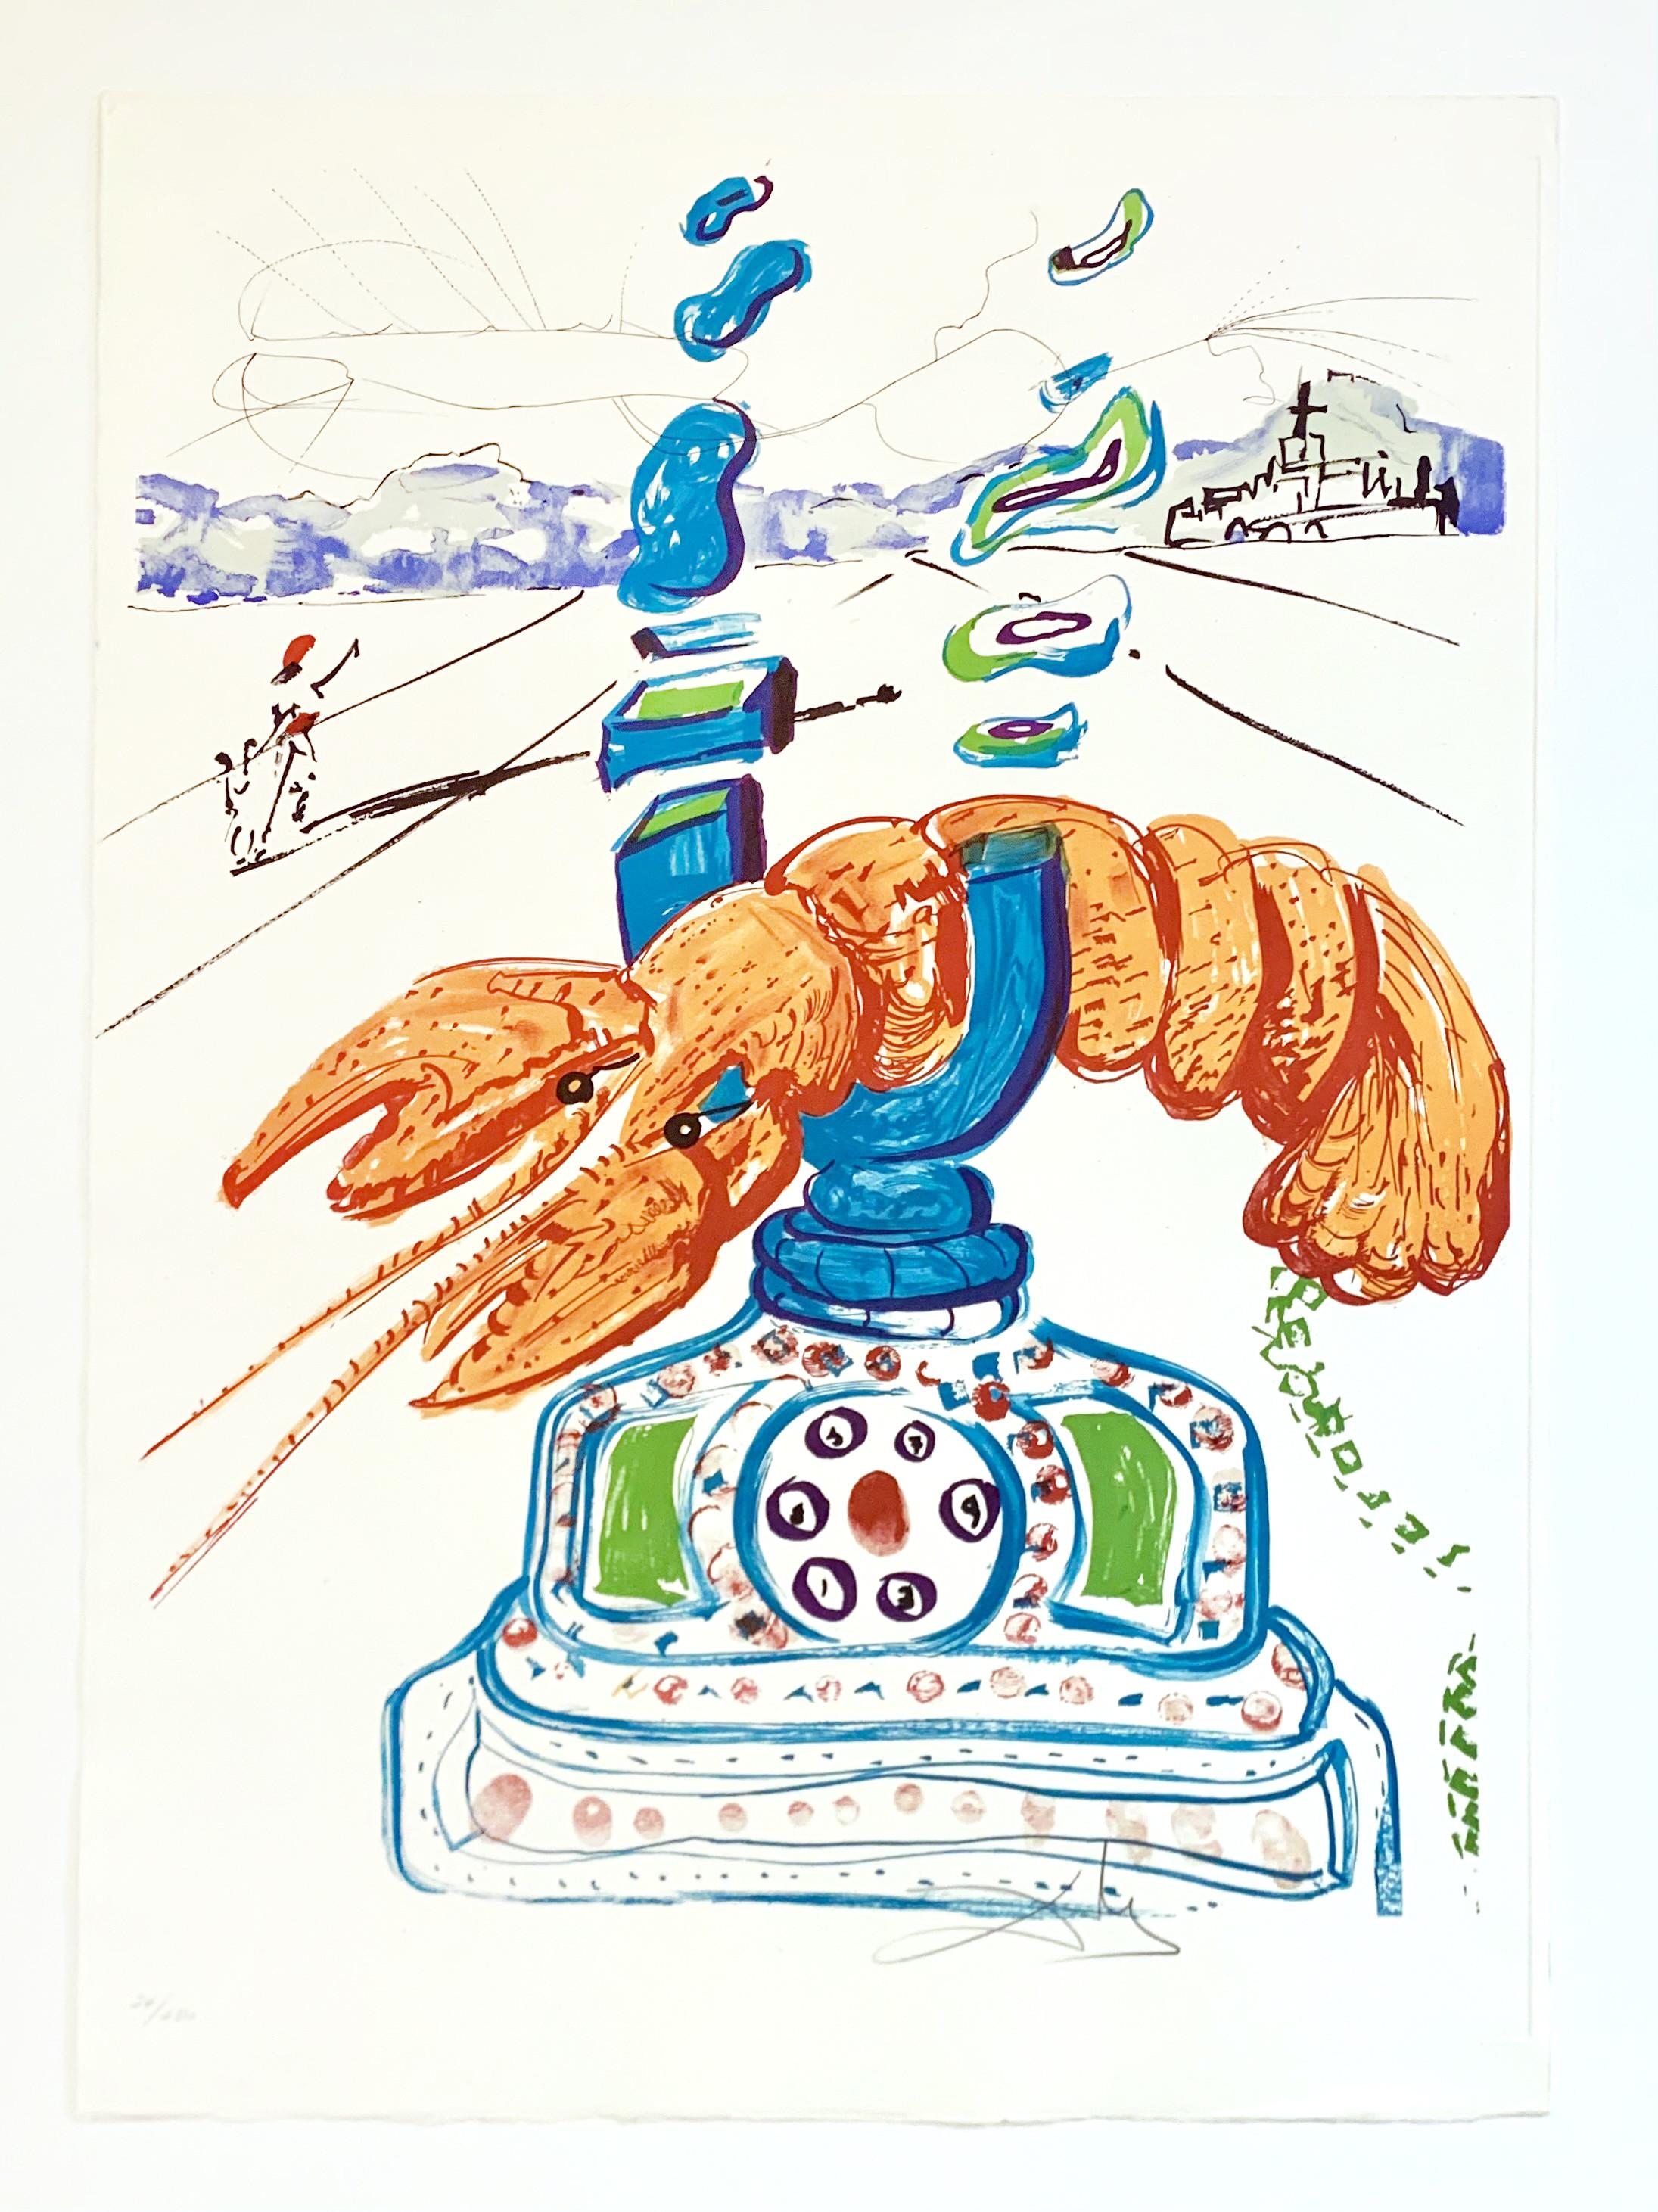 Cybernetic Lobster Telephone - Print by Salvador Dalí